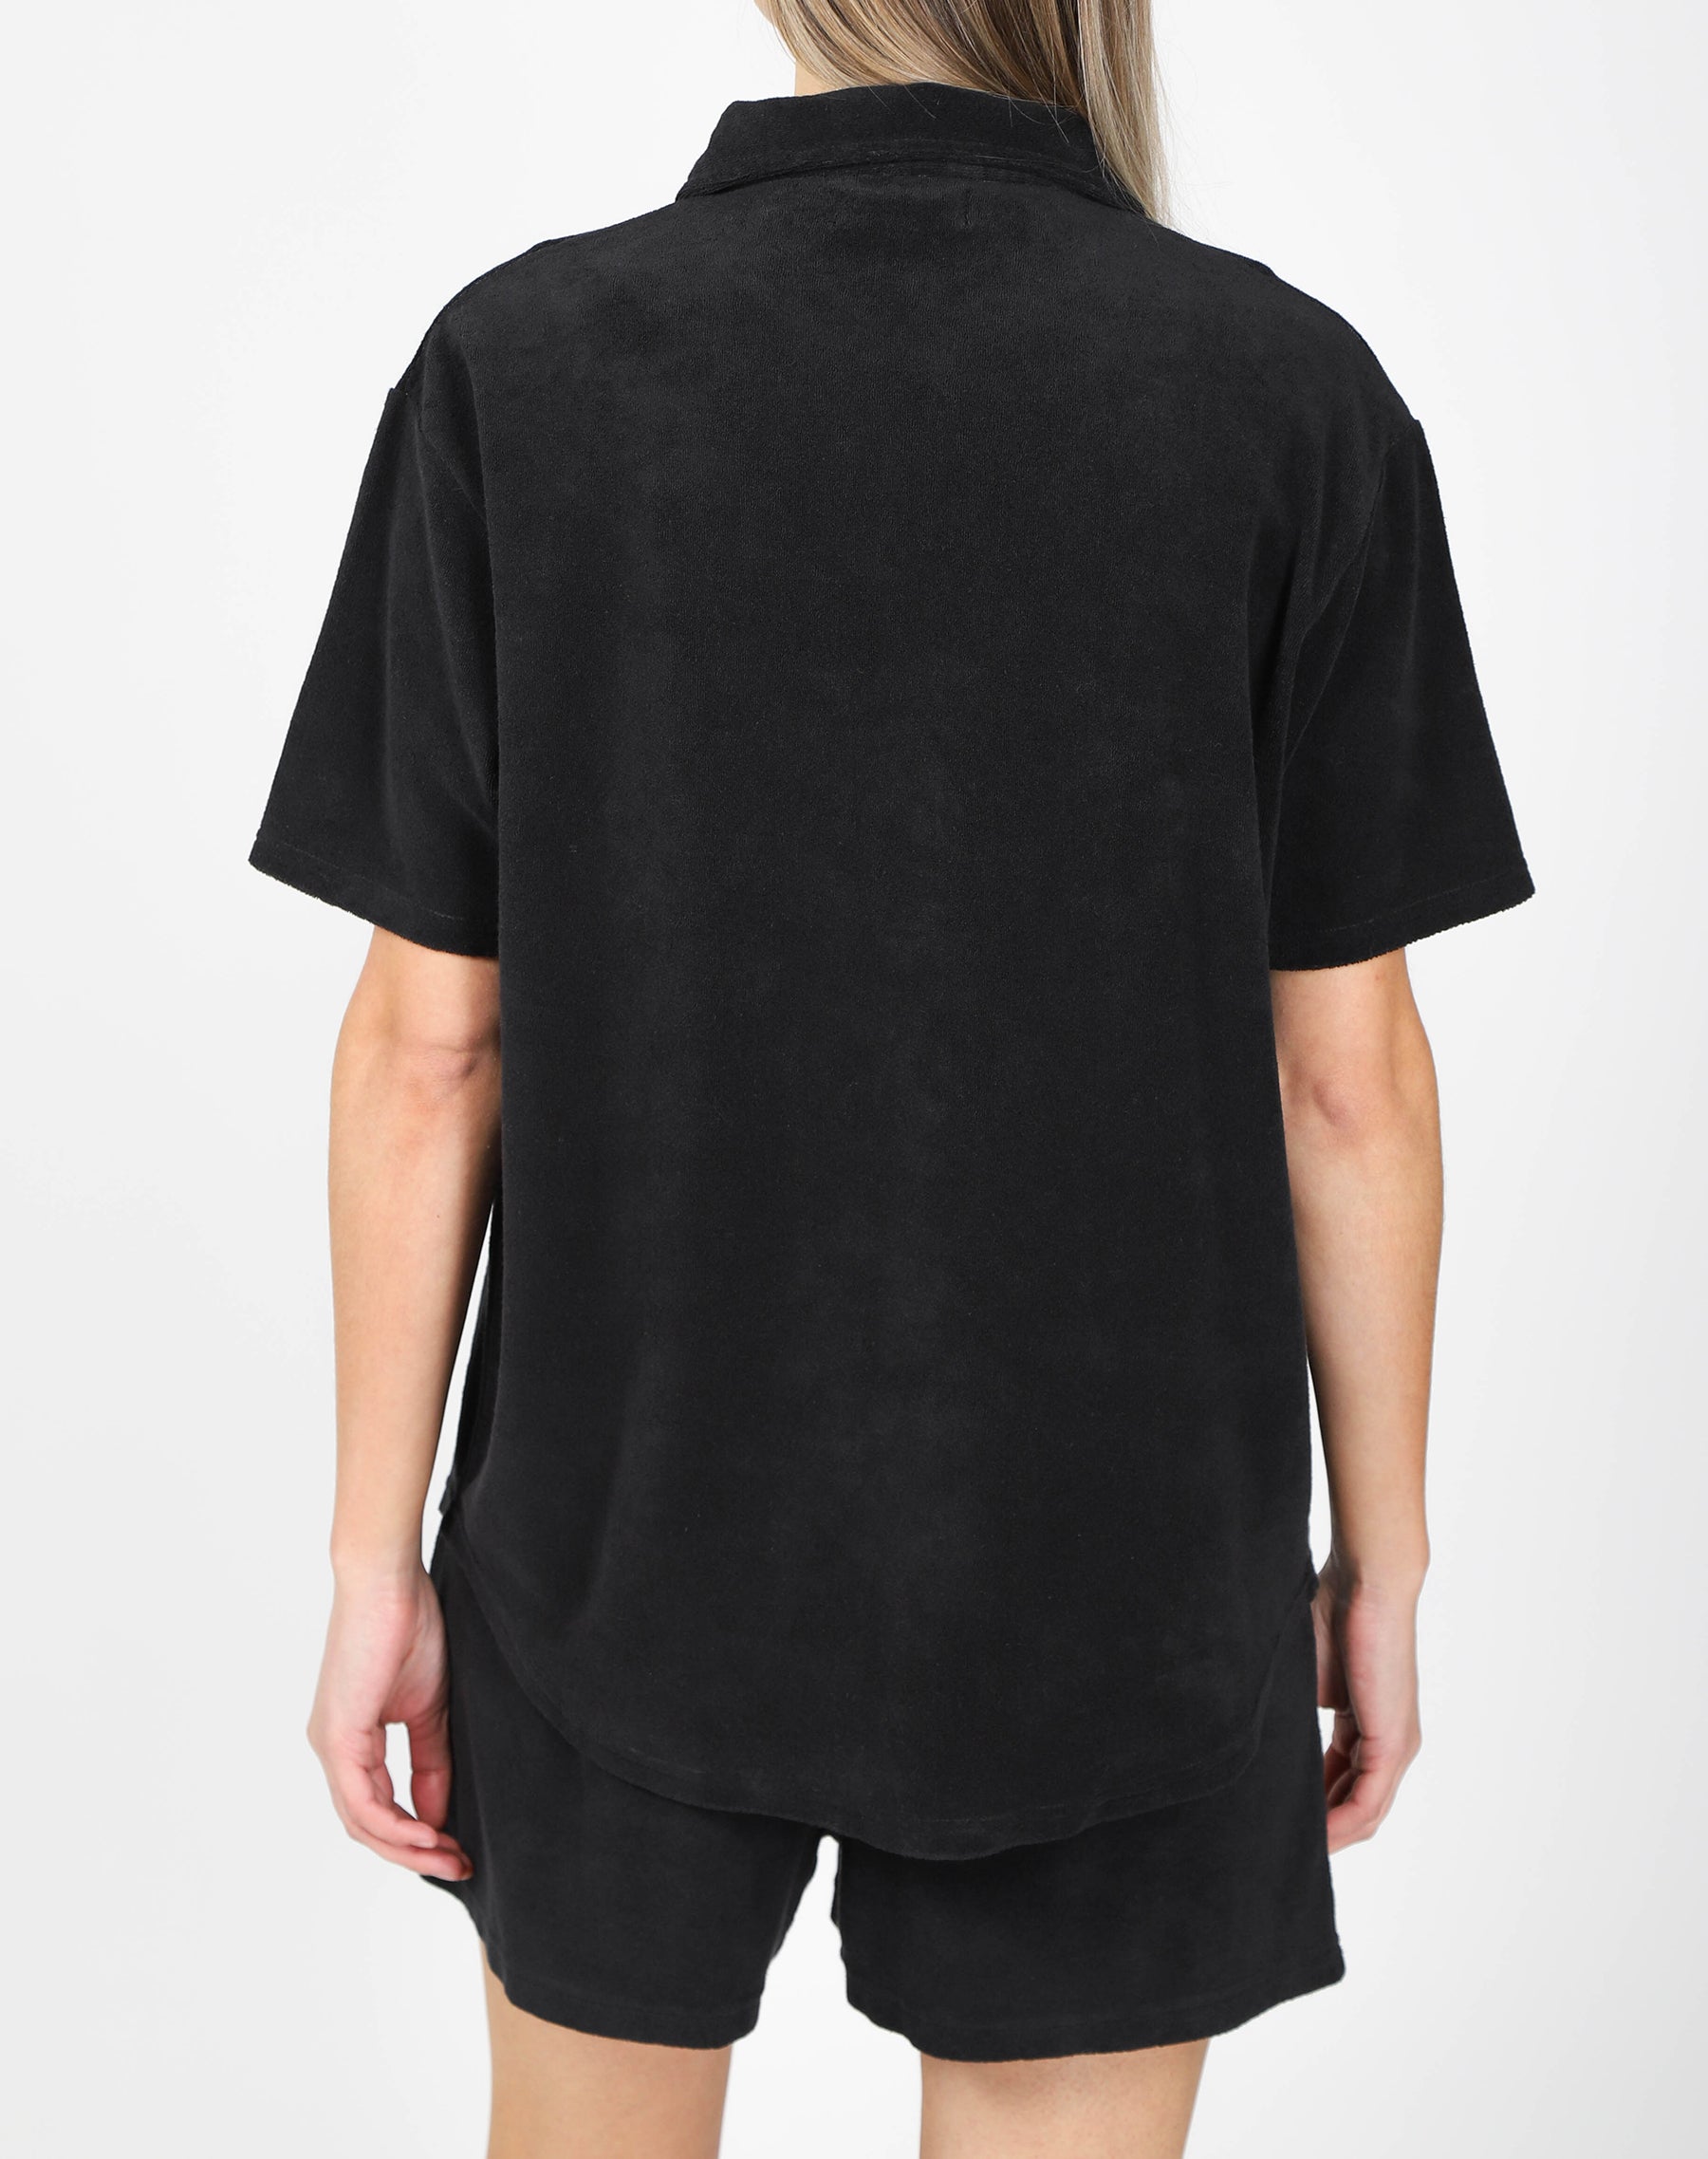 The Terry Cloth Button Up Shirt | Black